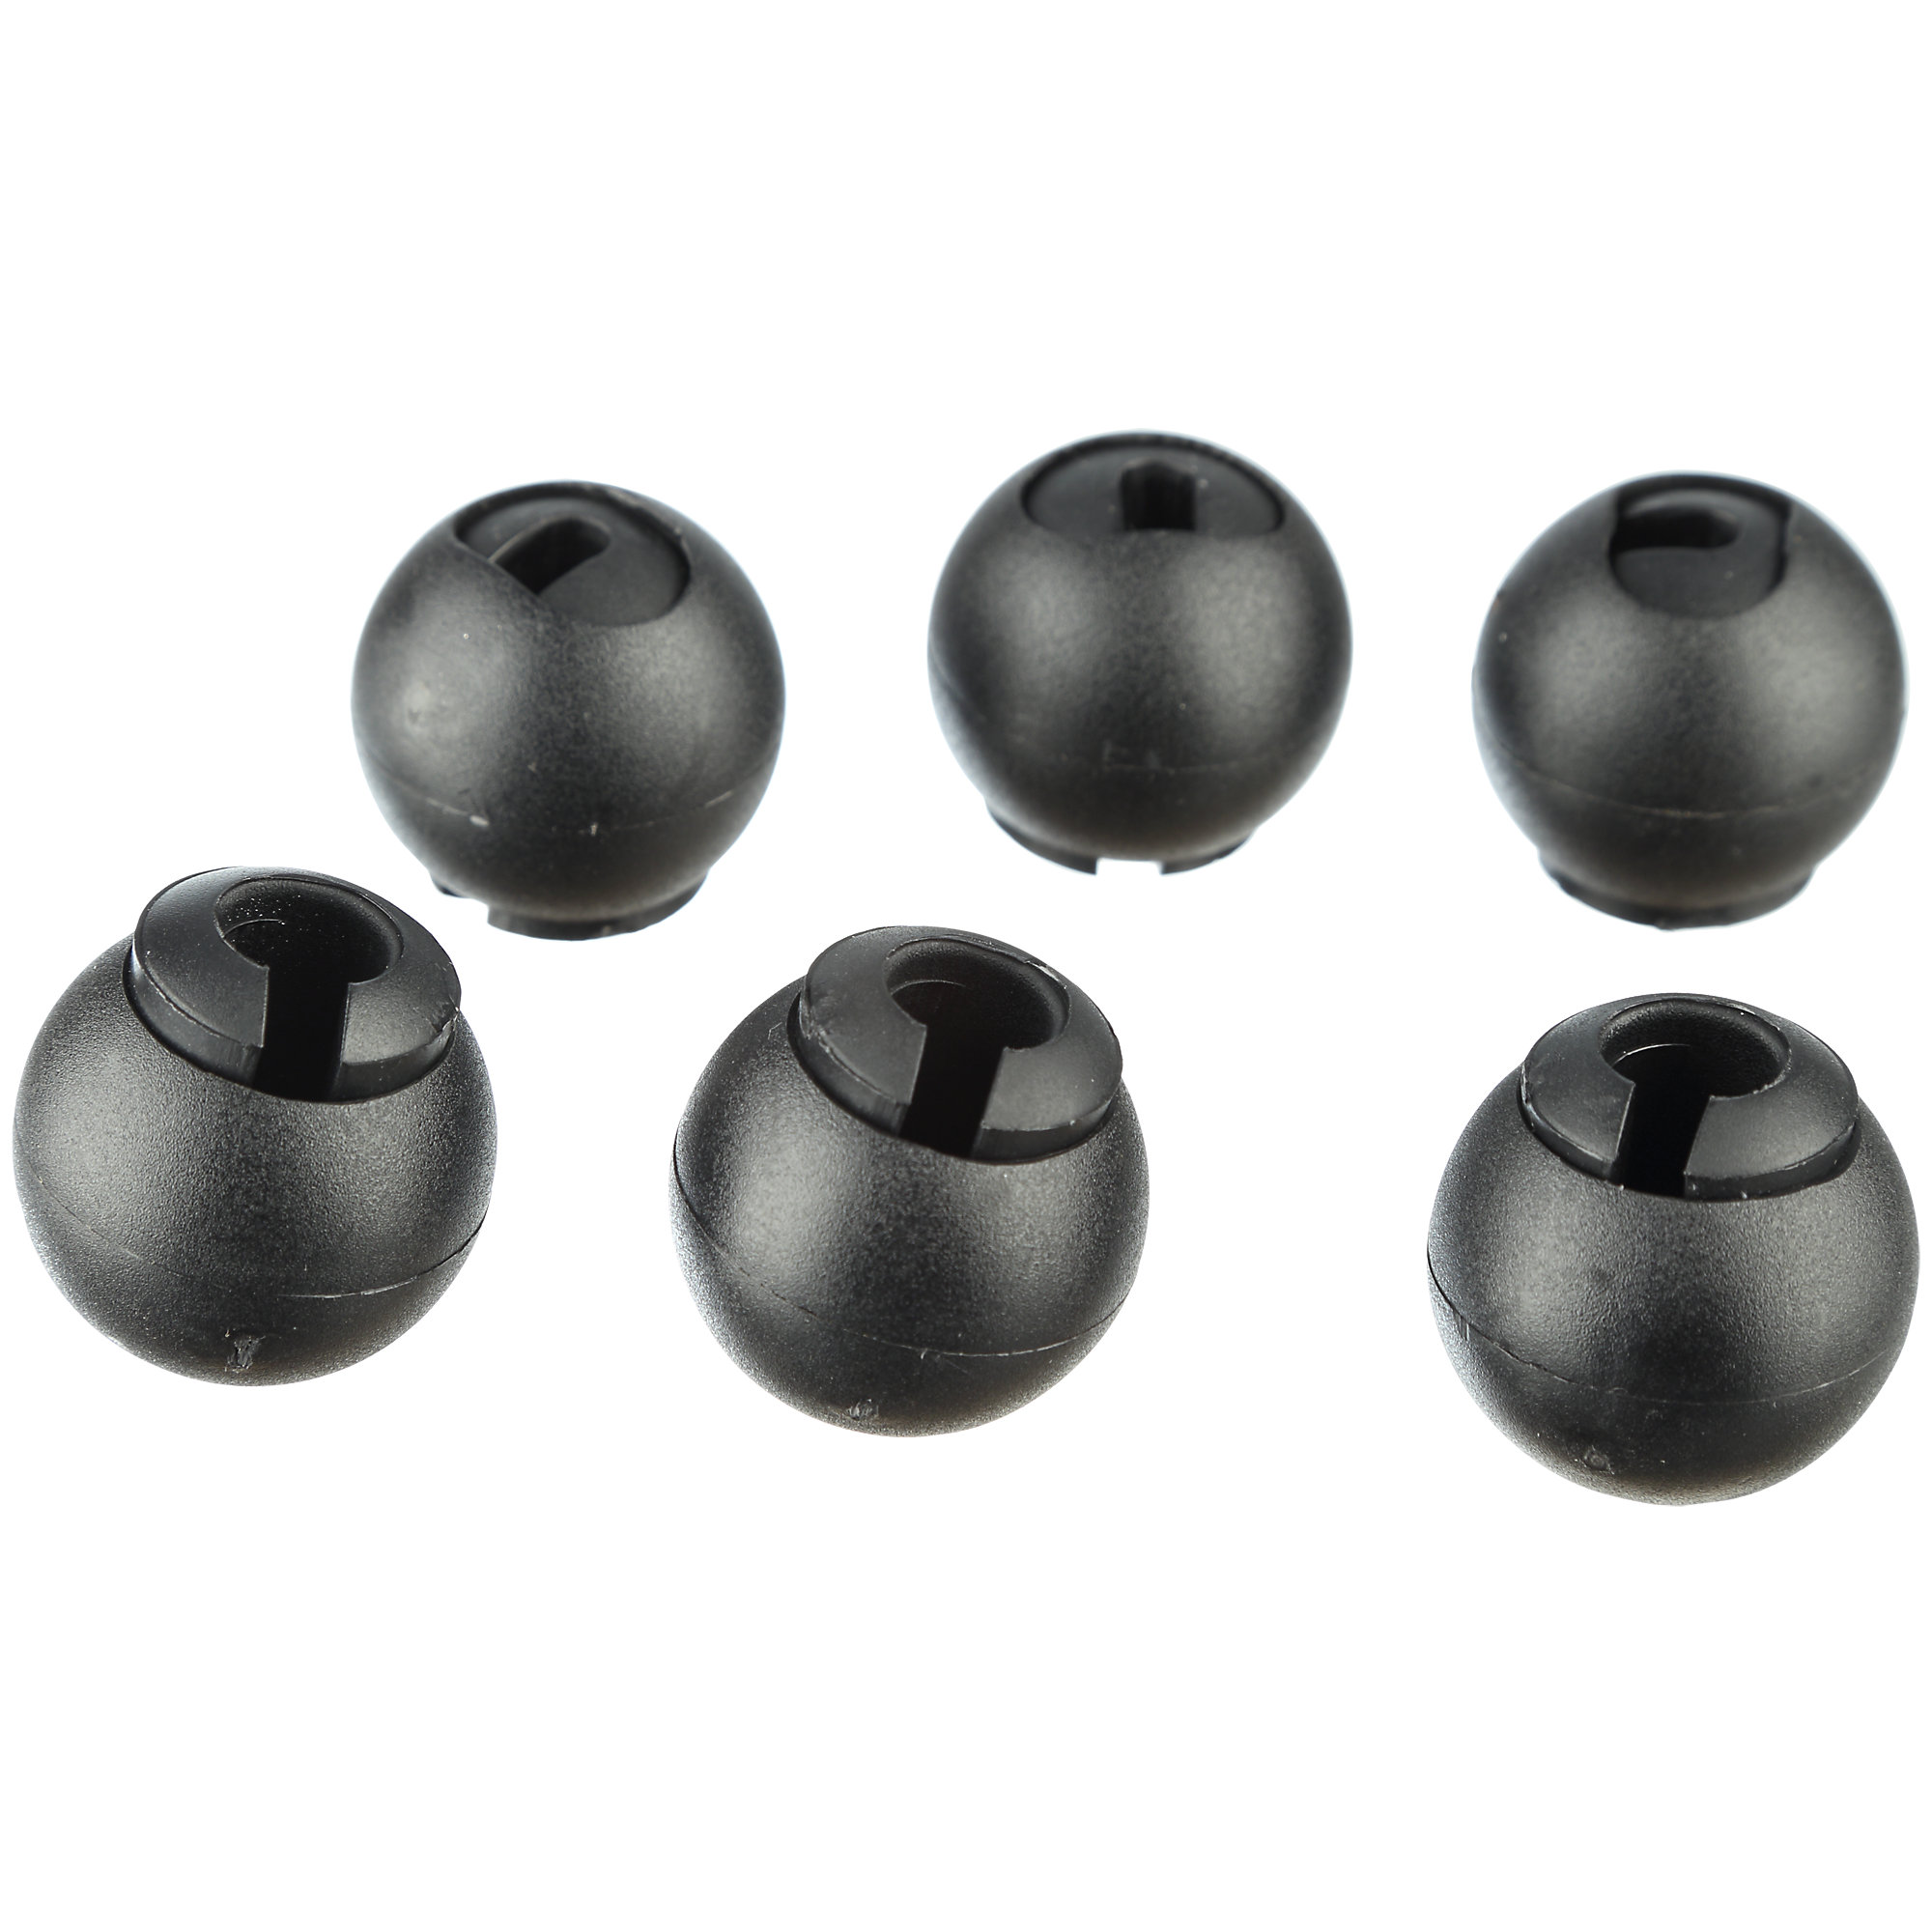 Cable Ball Stop Kit, Set of 6, BowFlex